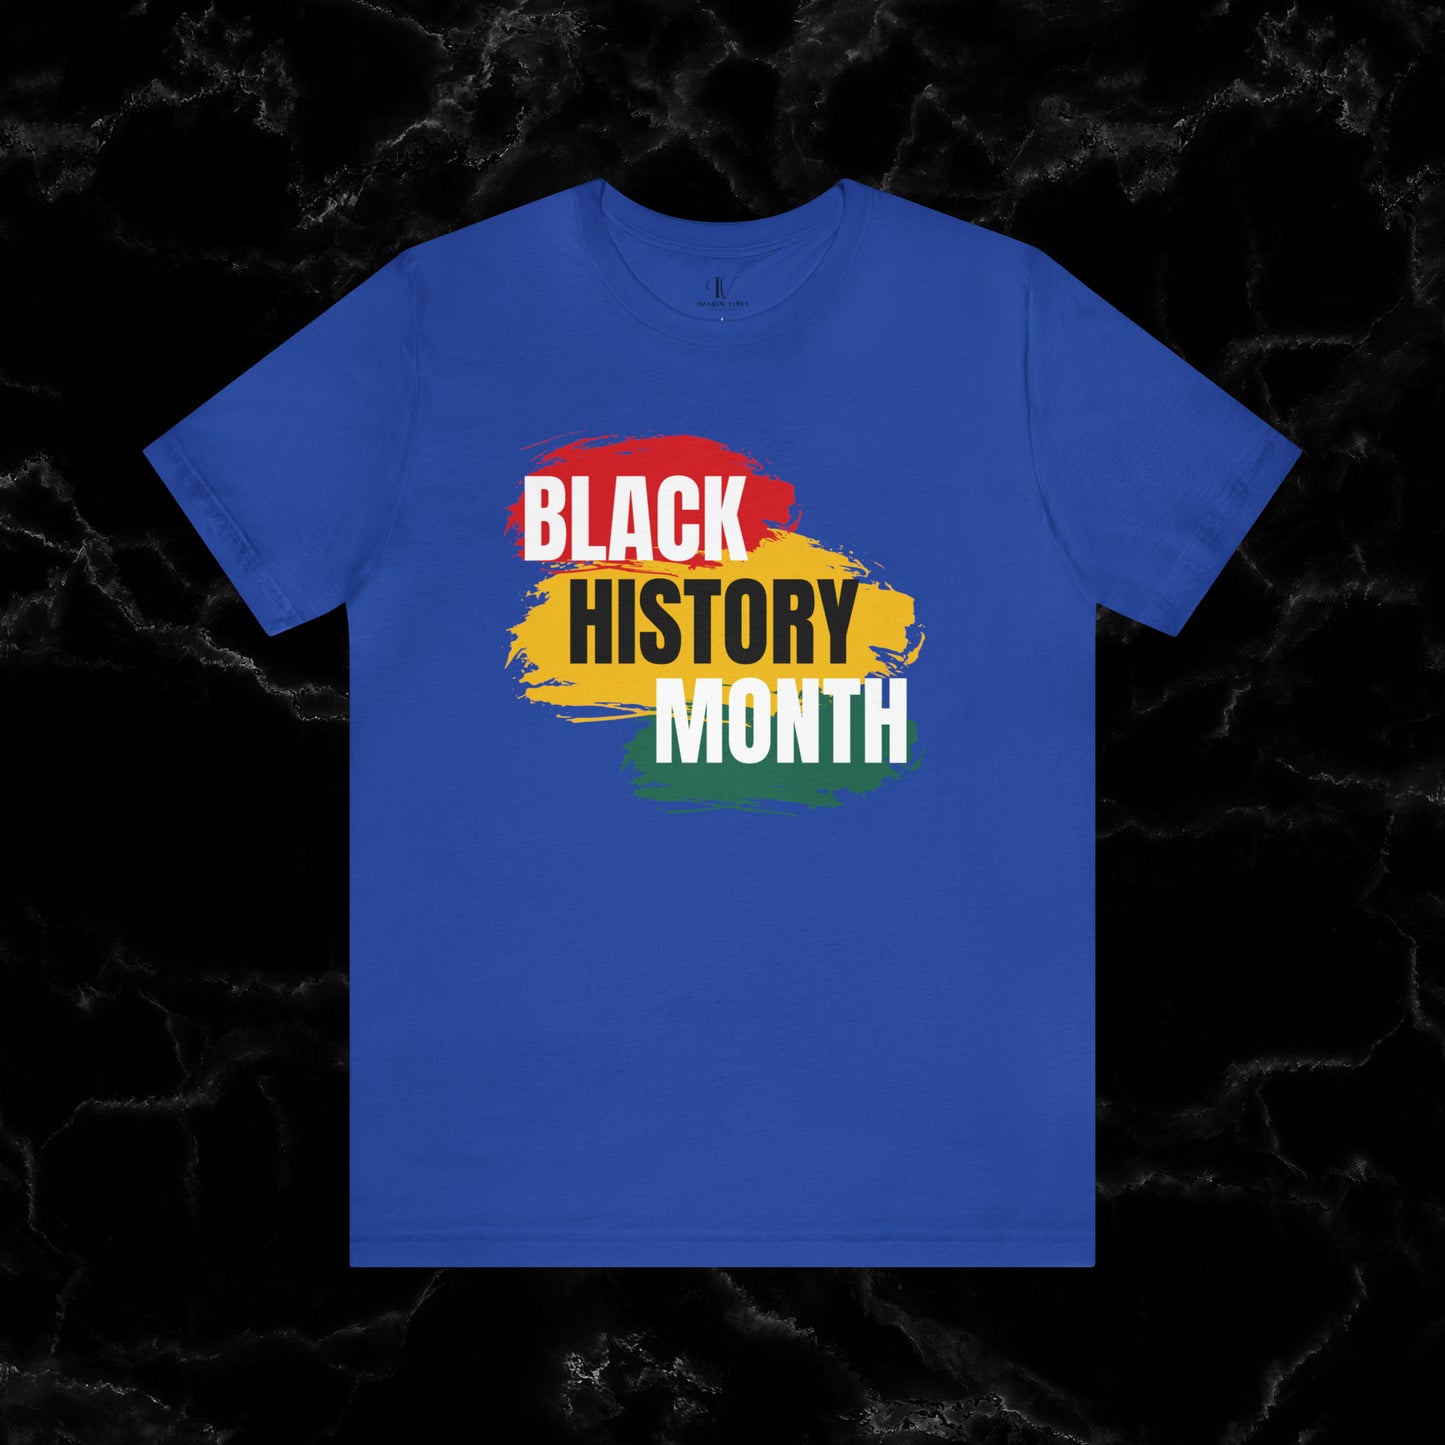 Trendy Black History Month Shirts Celebrating African American Pride and Heritage T-Shirt True Royal XS 